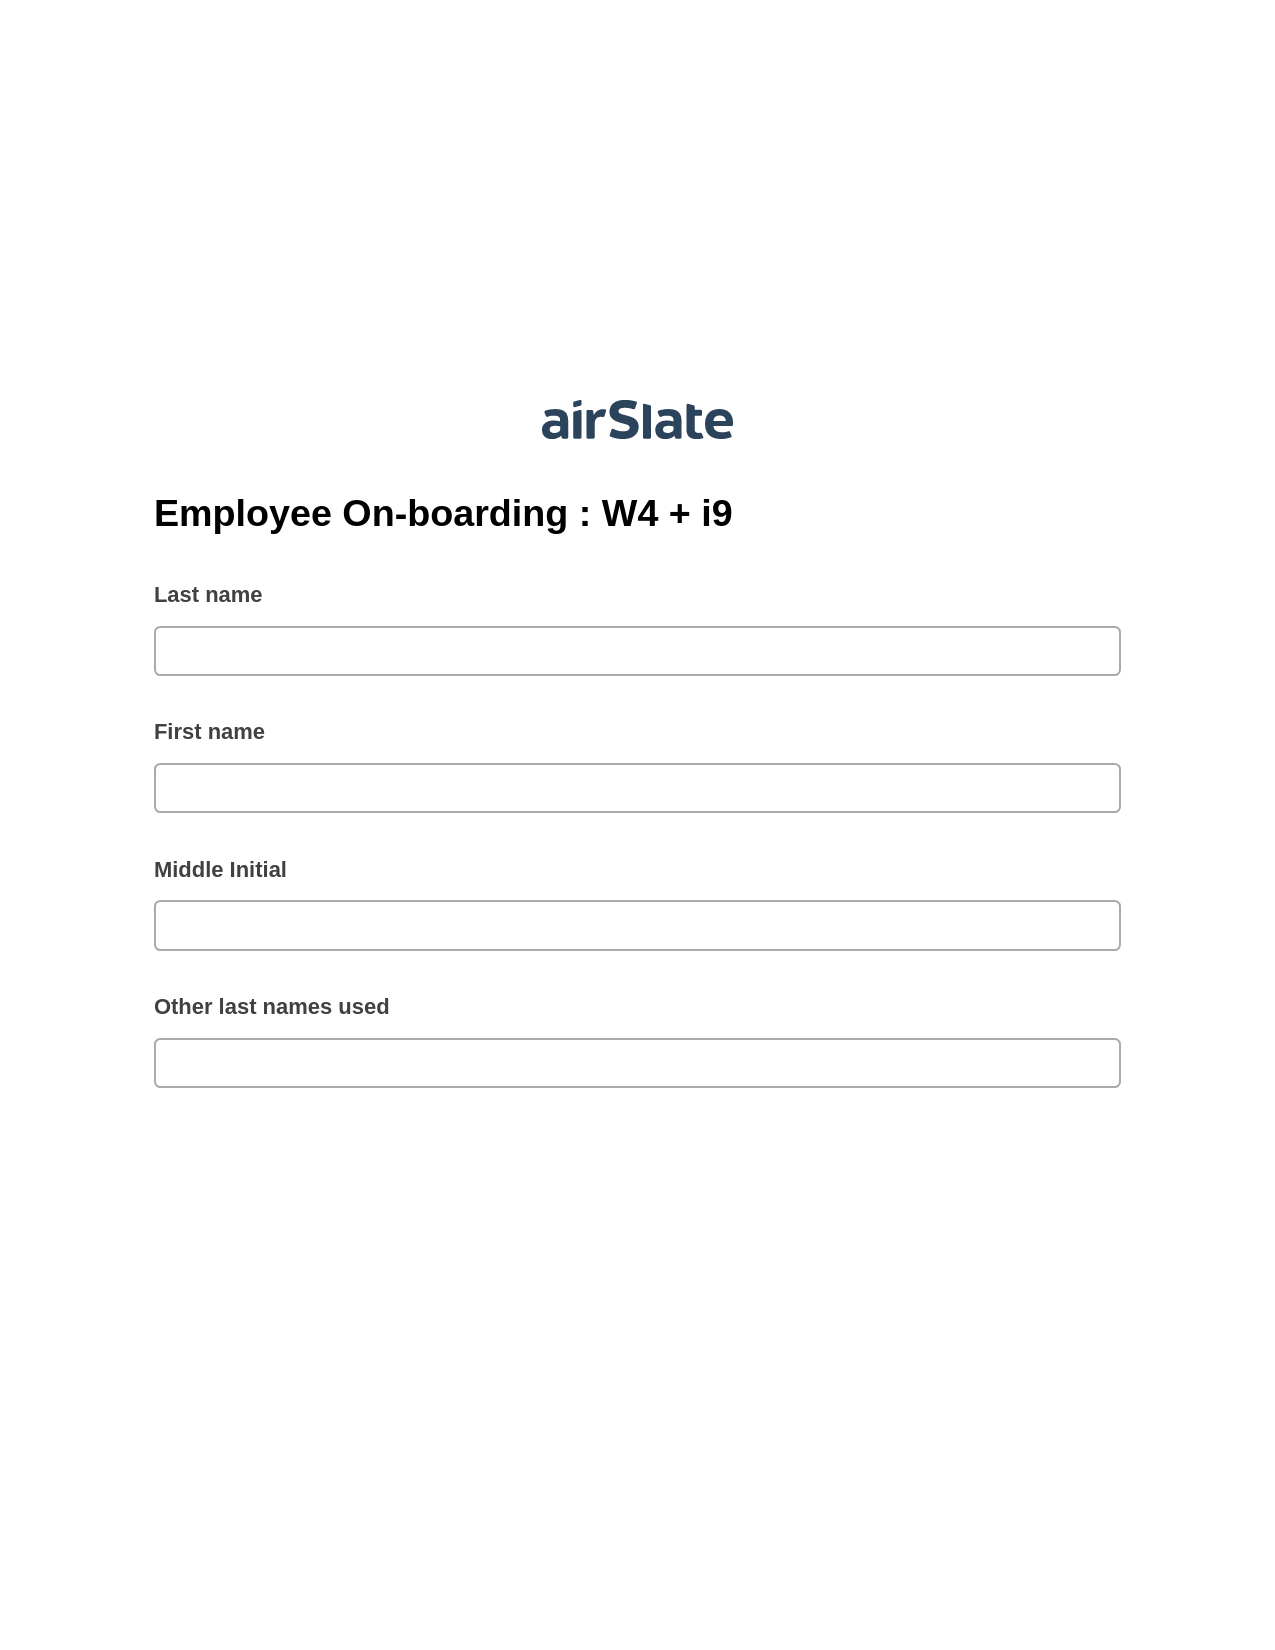 Employee On-boarding : W4 + i9 Pre-fill from another Slate Bot, Create Slate Bot, OneDrive Bot